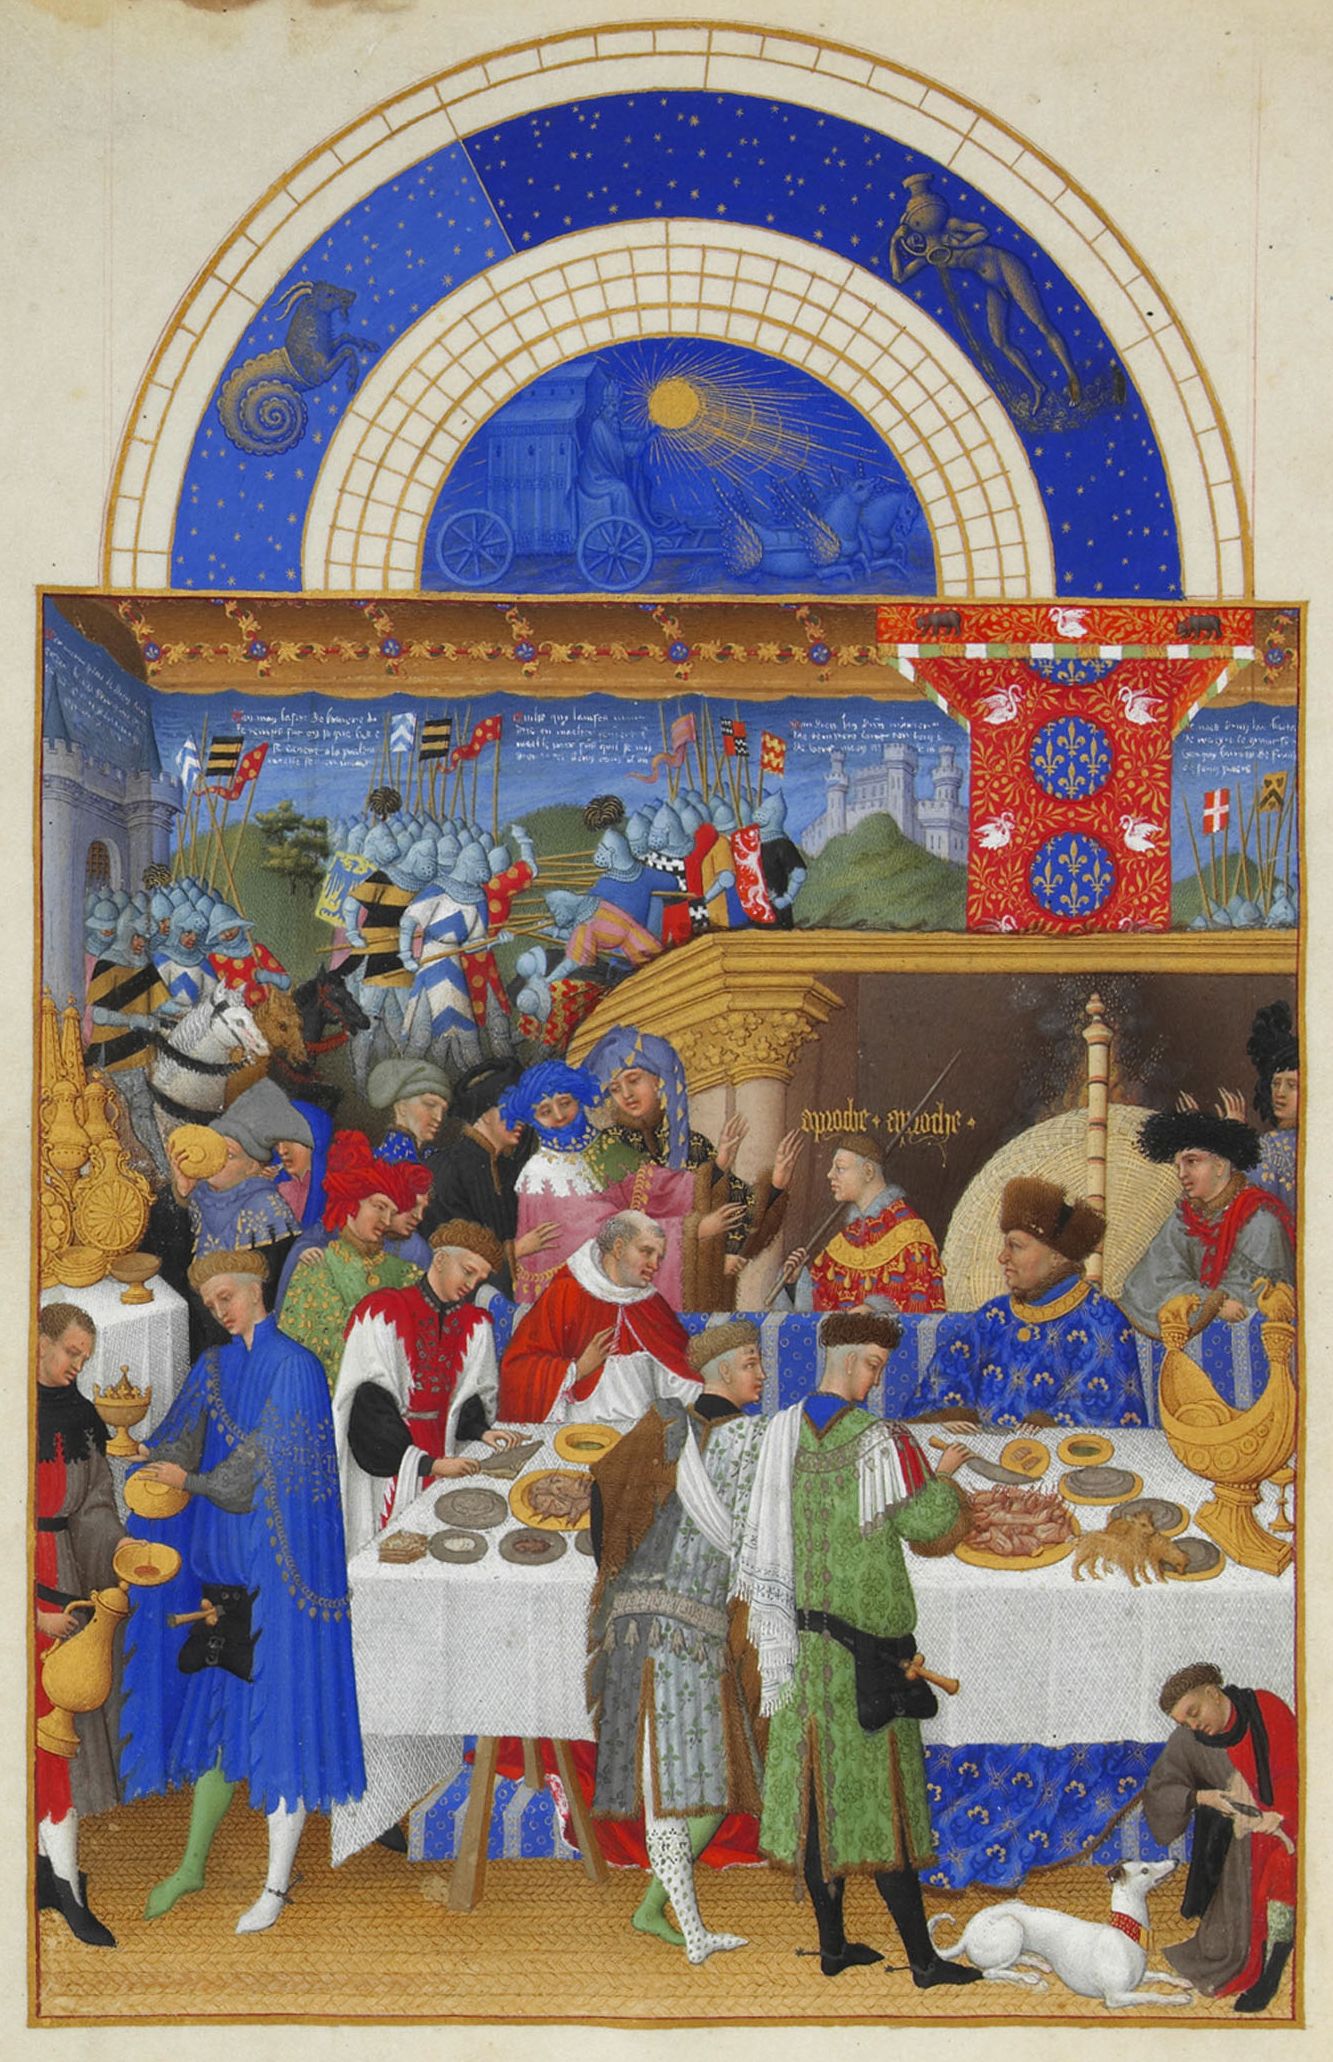 The Limbourg Brothers - ca. 1385 - 1416